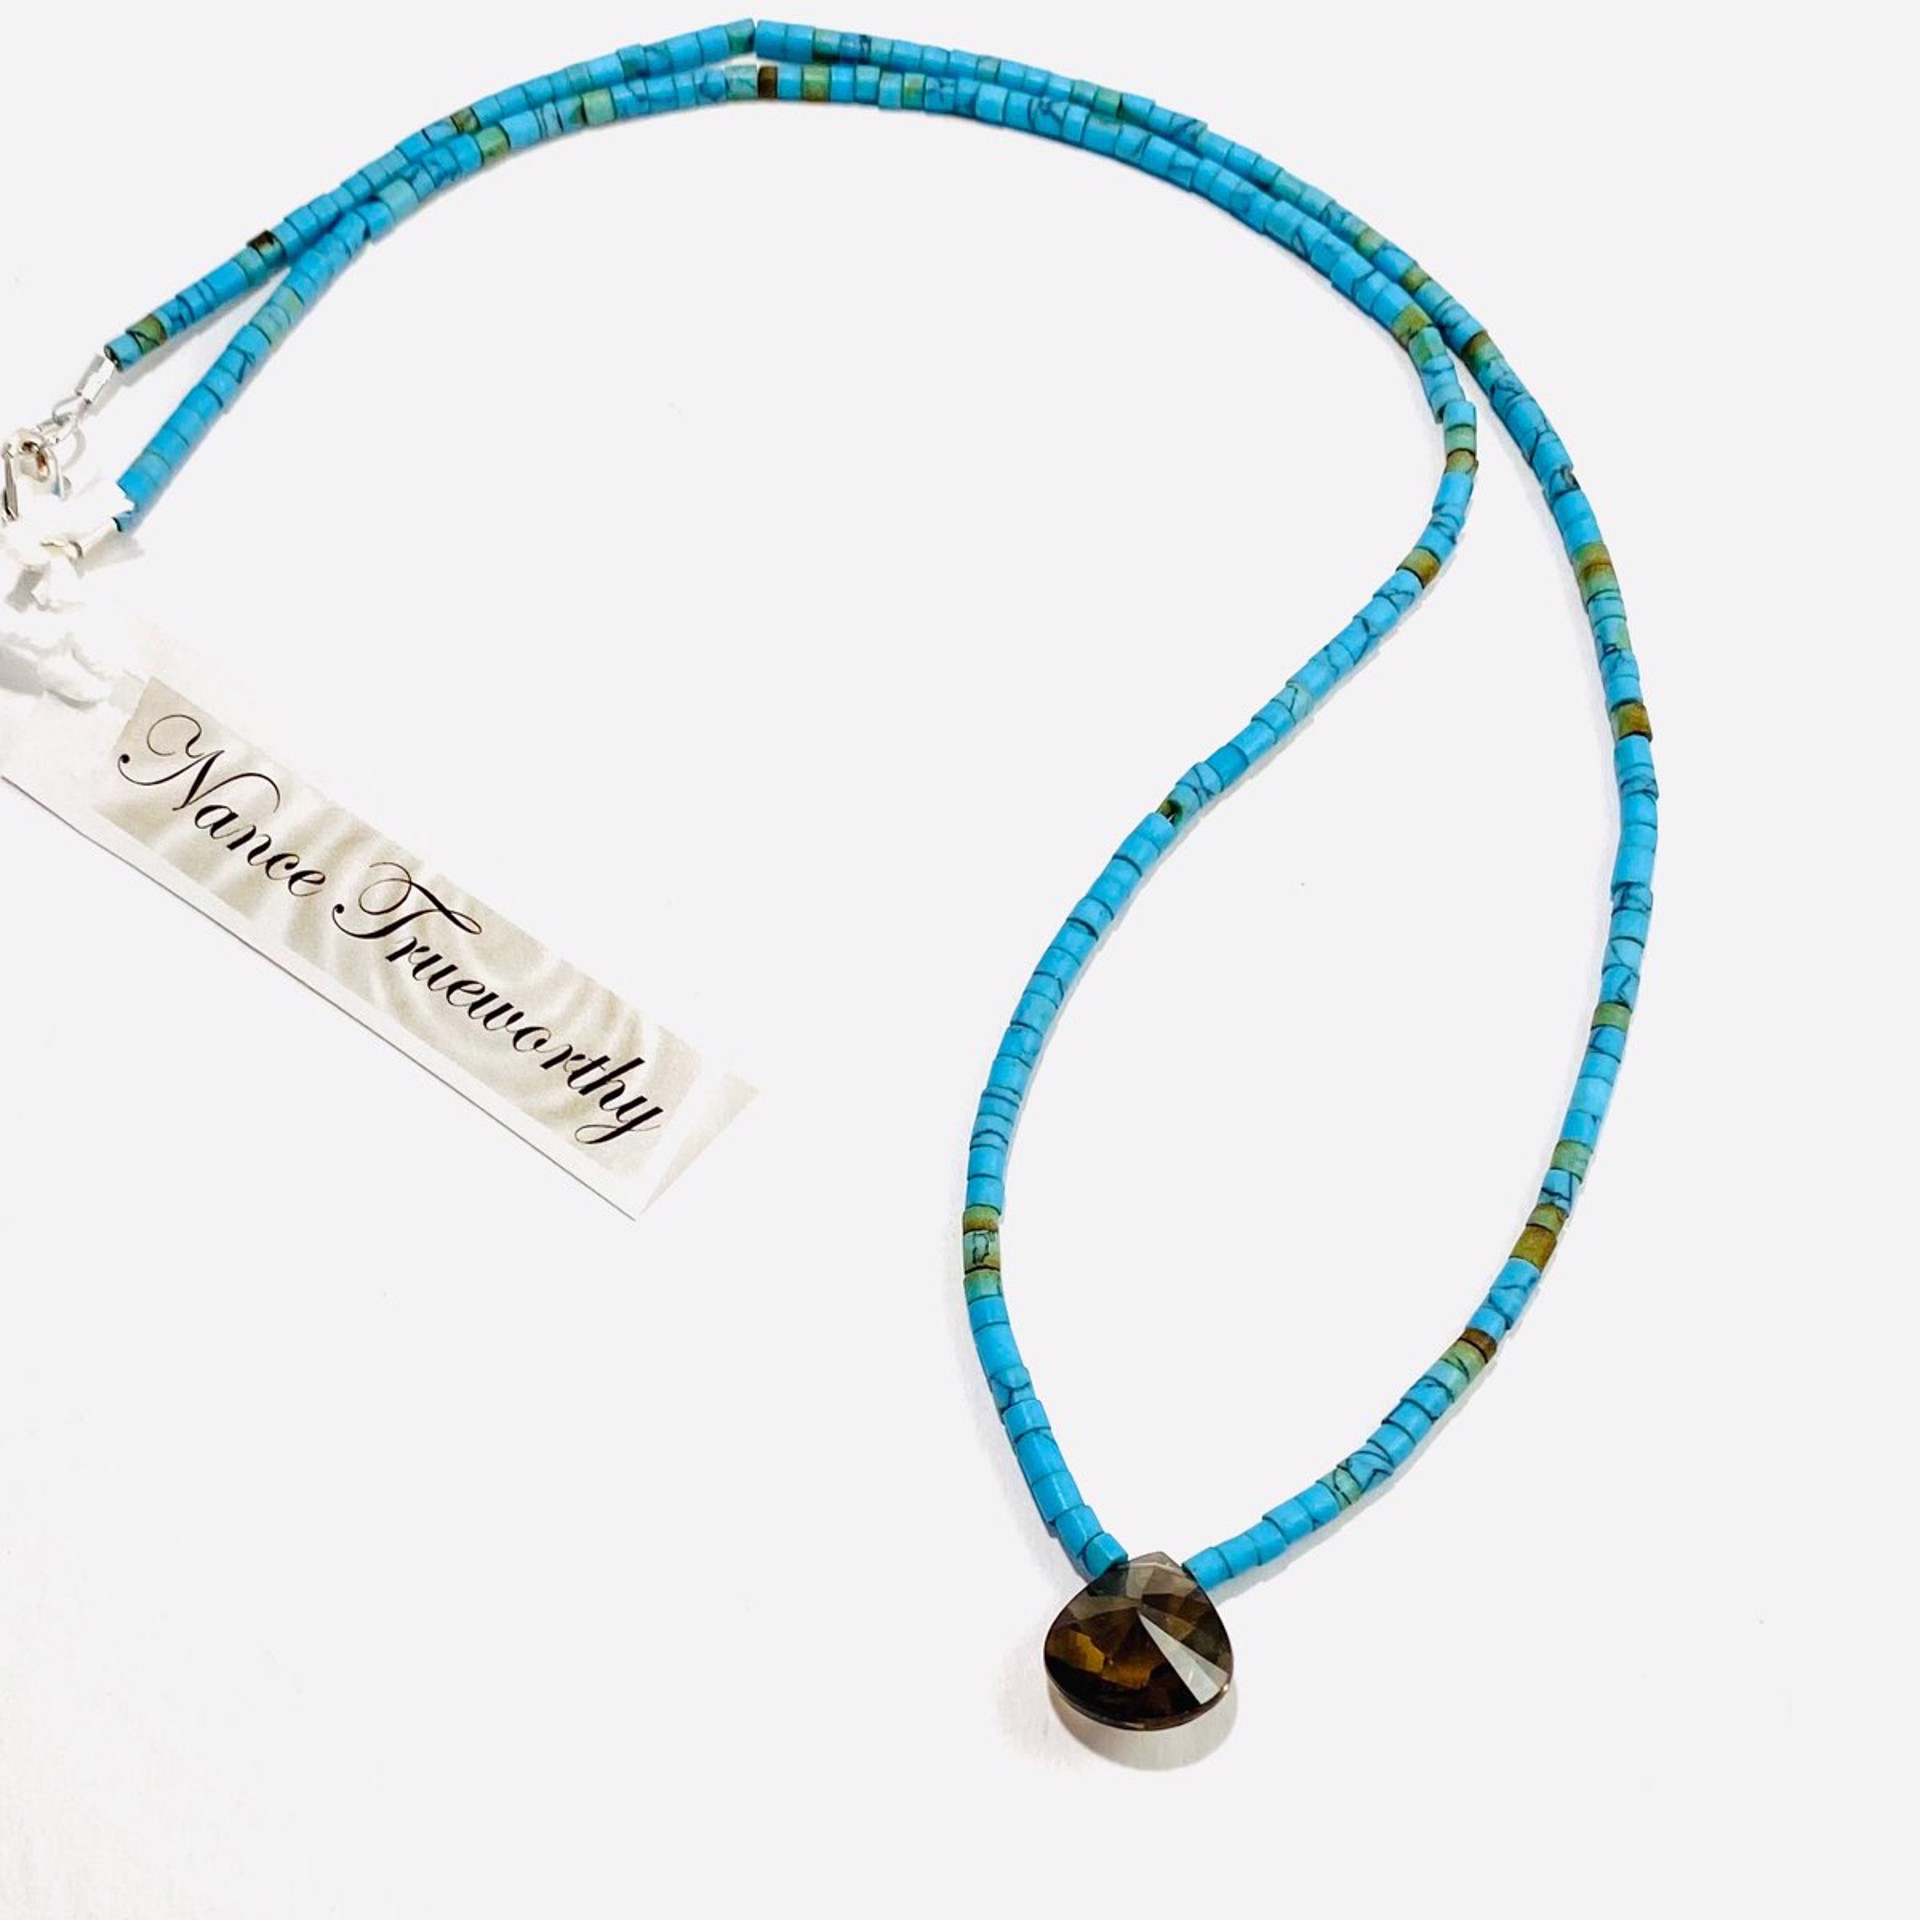 NT22-238 Turquoise Tube Bead Faceted Smokey Quartz Focal Necklace by Nance Trueworthy